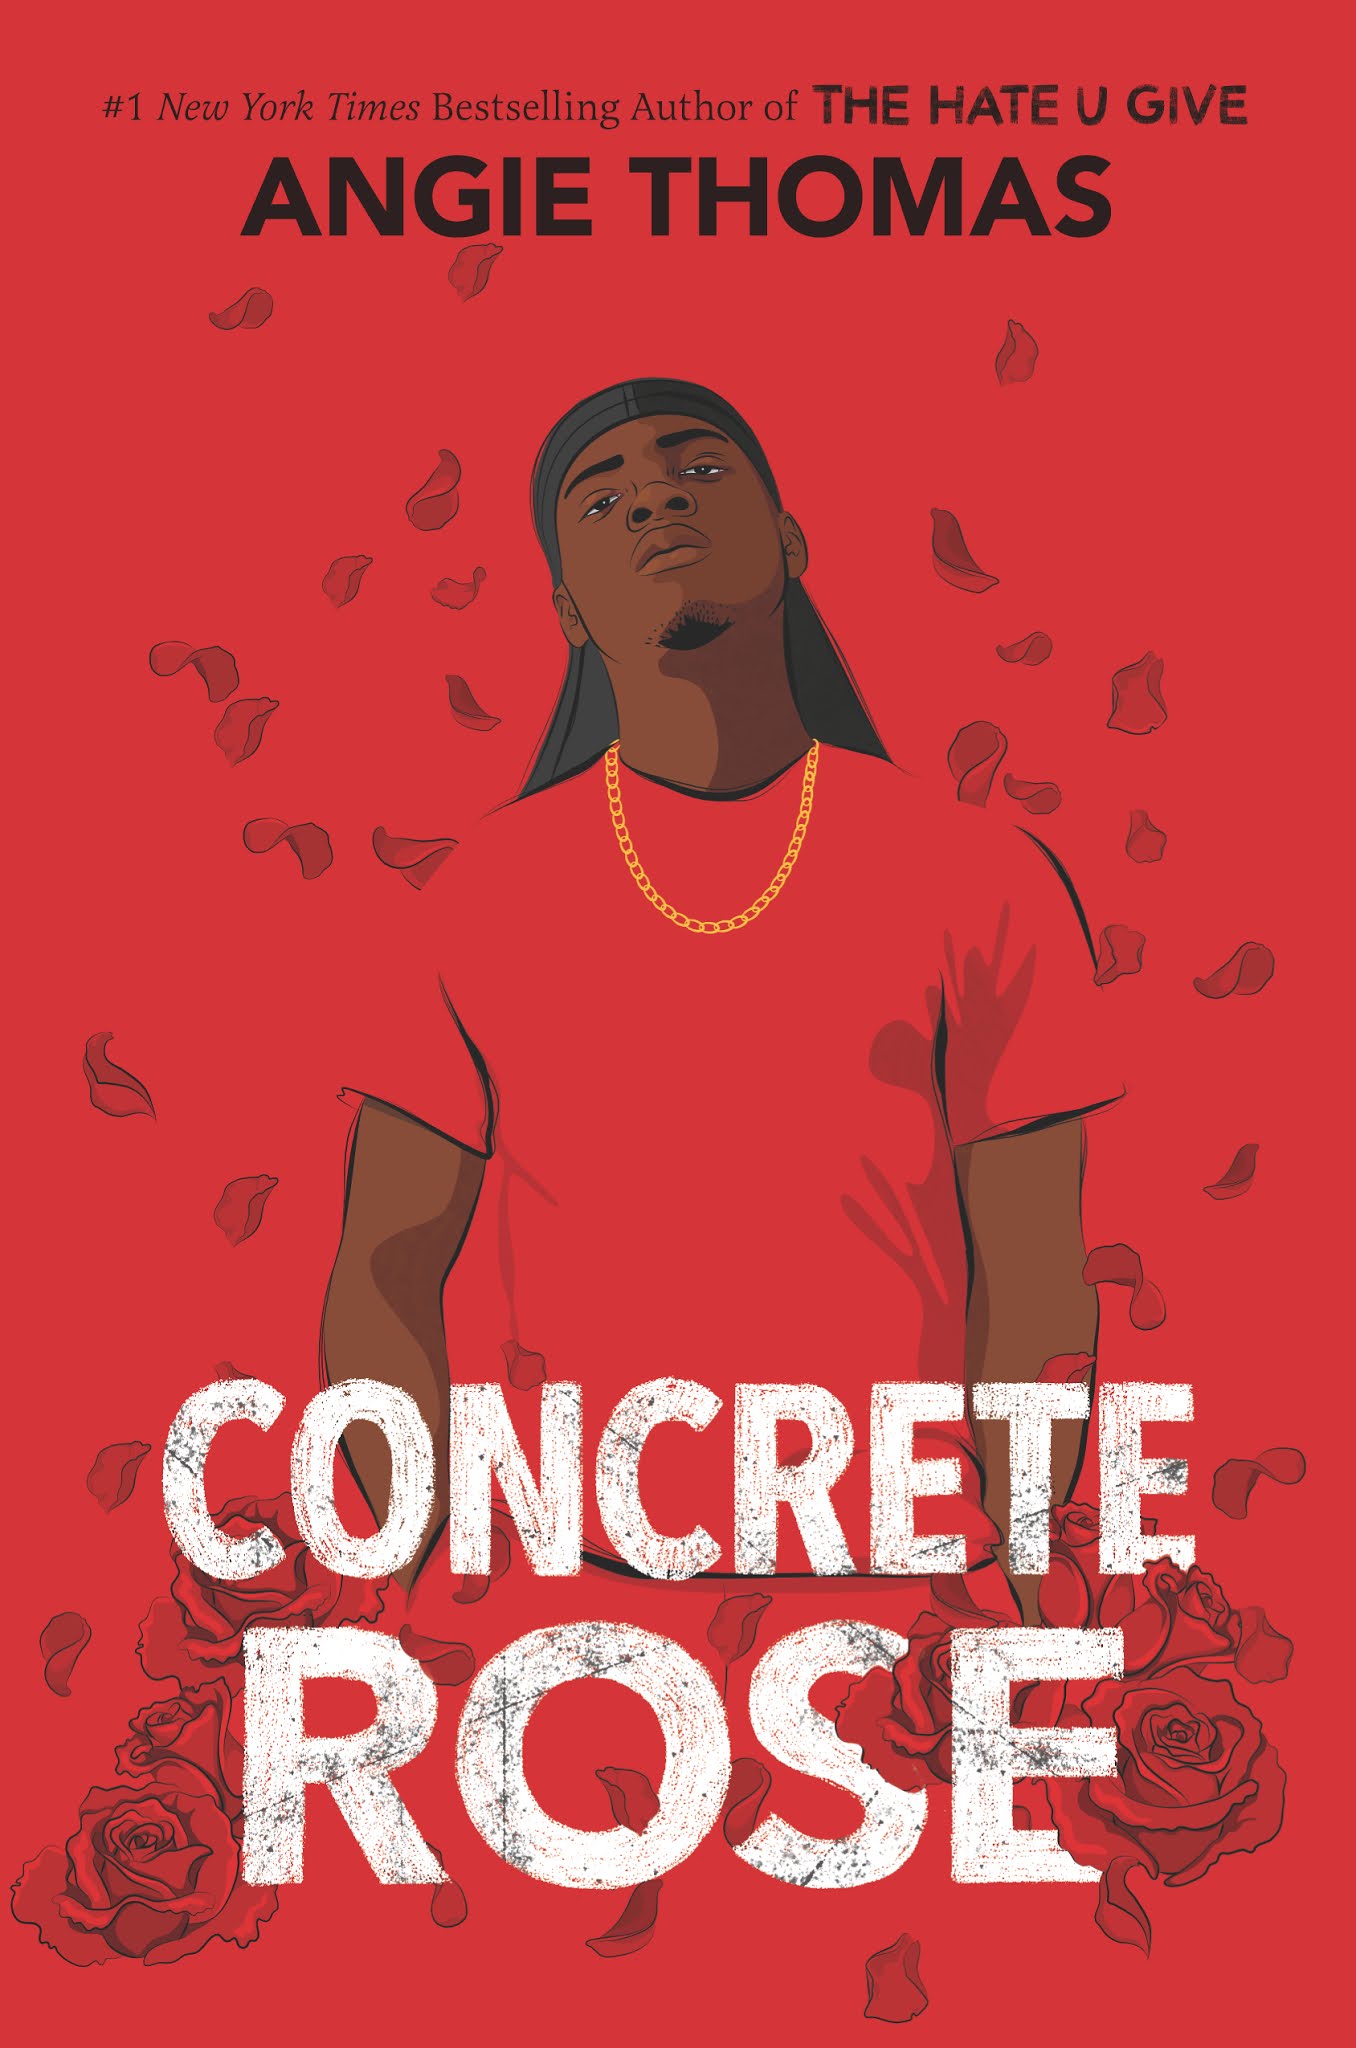 Concrete Rose by Angie Thomas | Superior Young Adult Fiction | Book Review